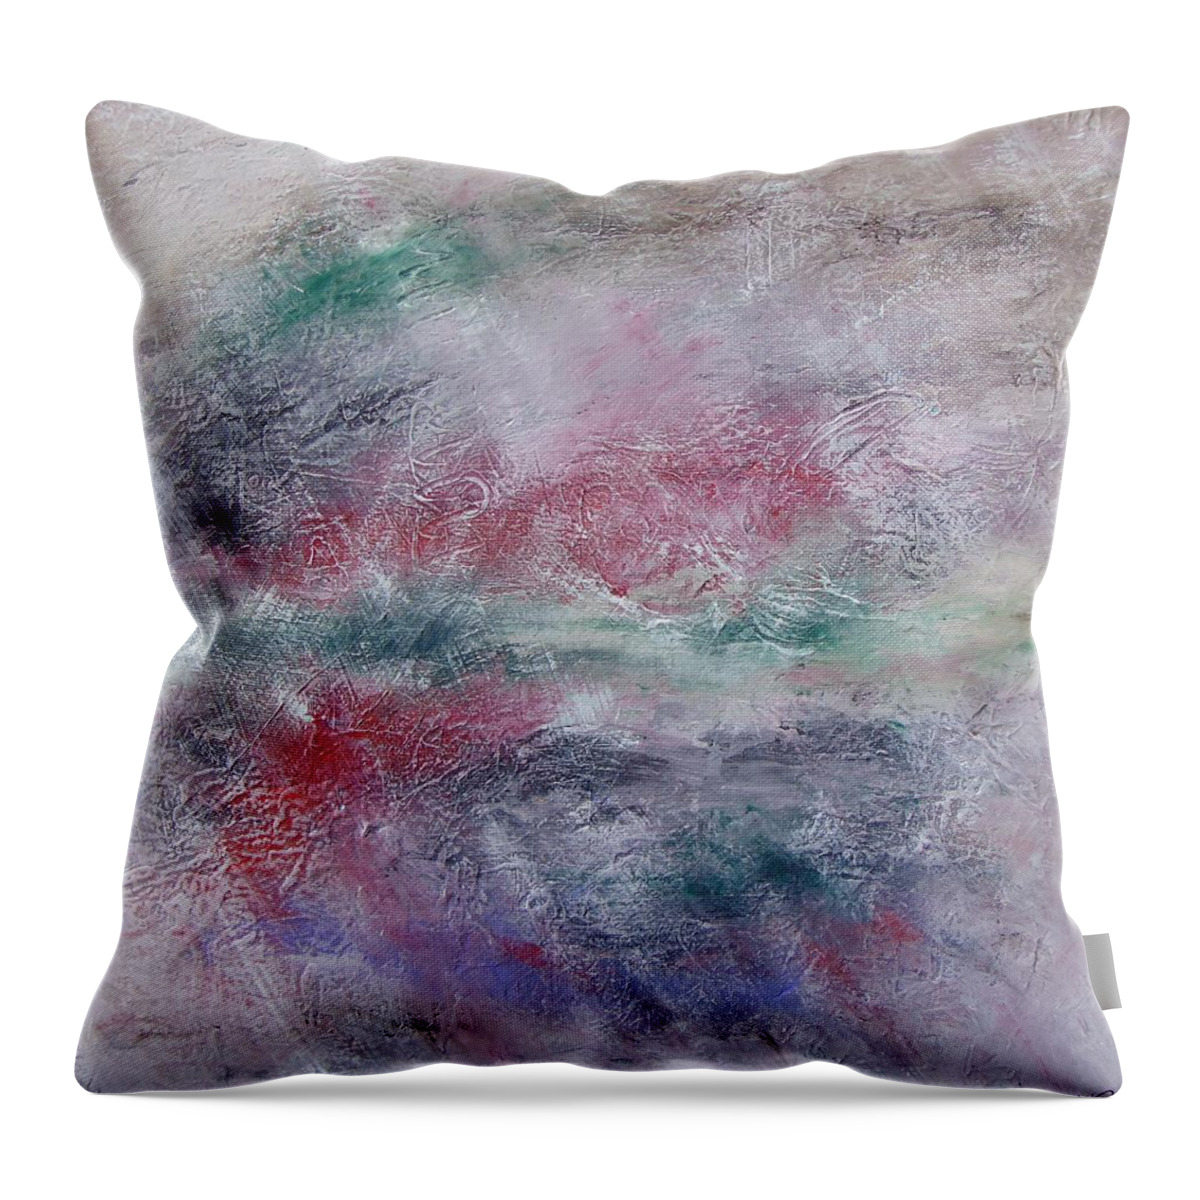 Landscape Throw Pillow featuring the painting Another dimension by Frederic Payet